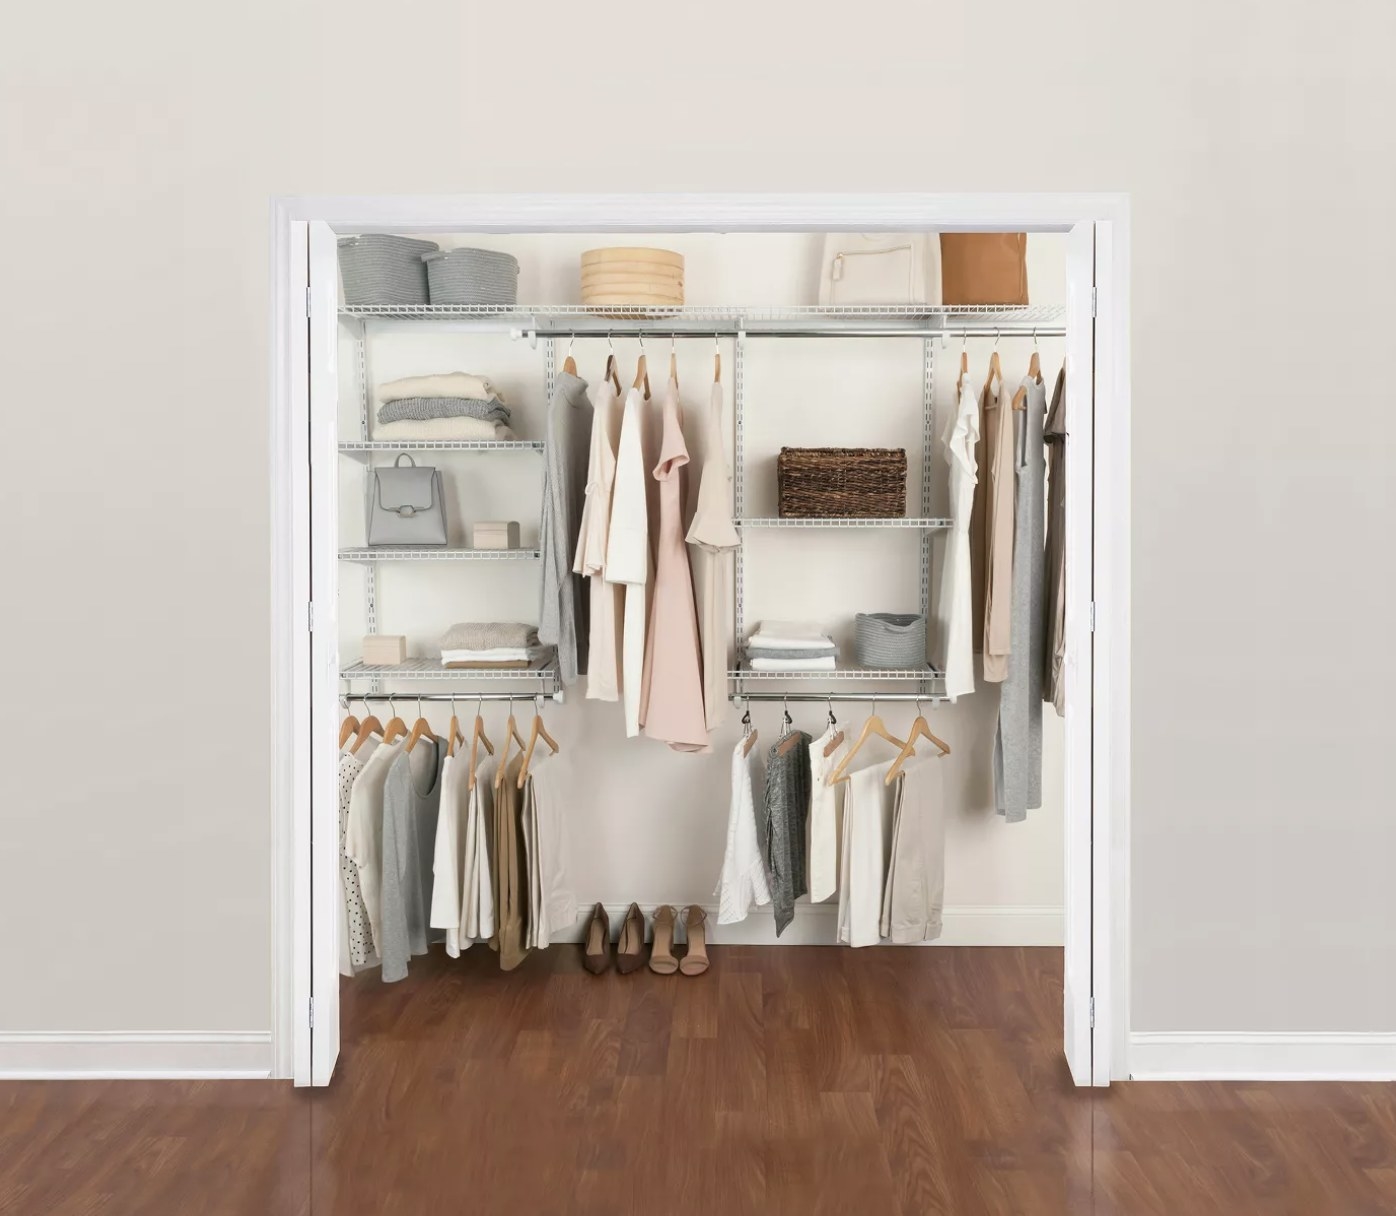 The closet system with clothes hung up